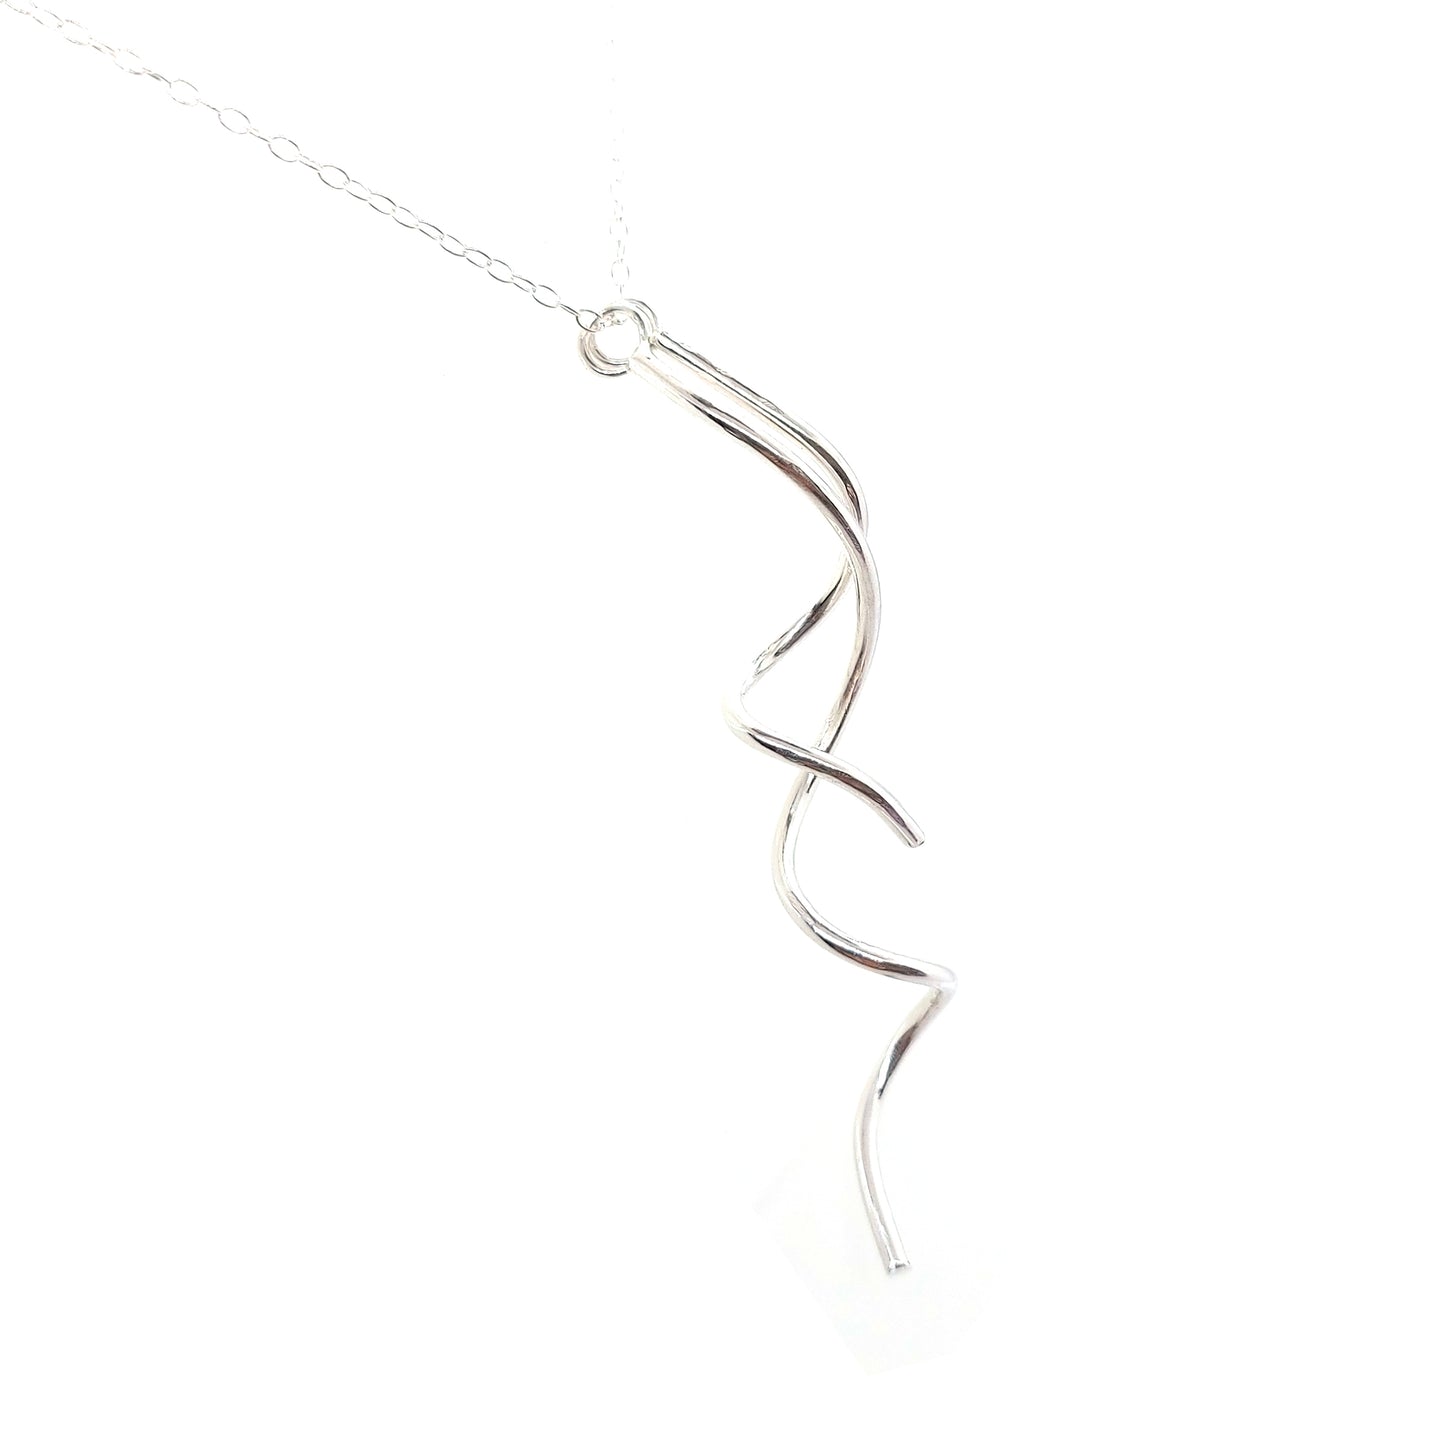 A silver spiral pendant with 2 strands intertwined suspended from a silver chain.